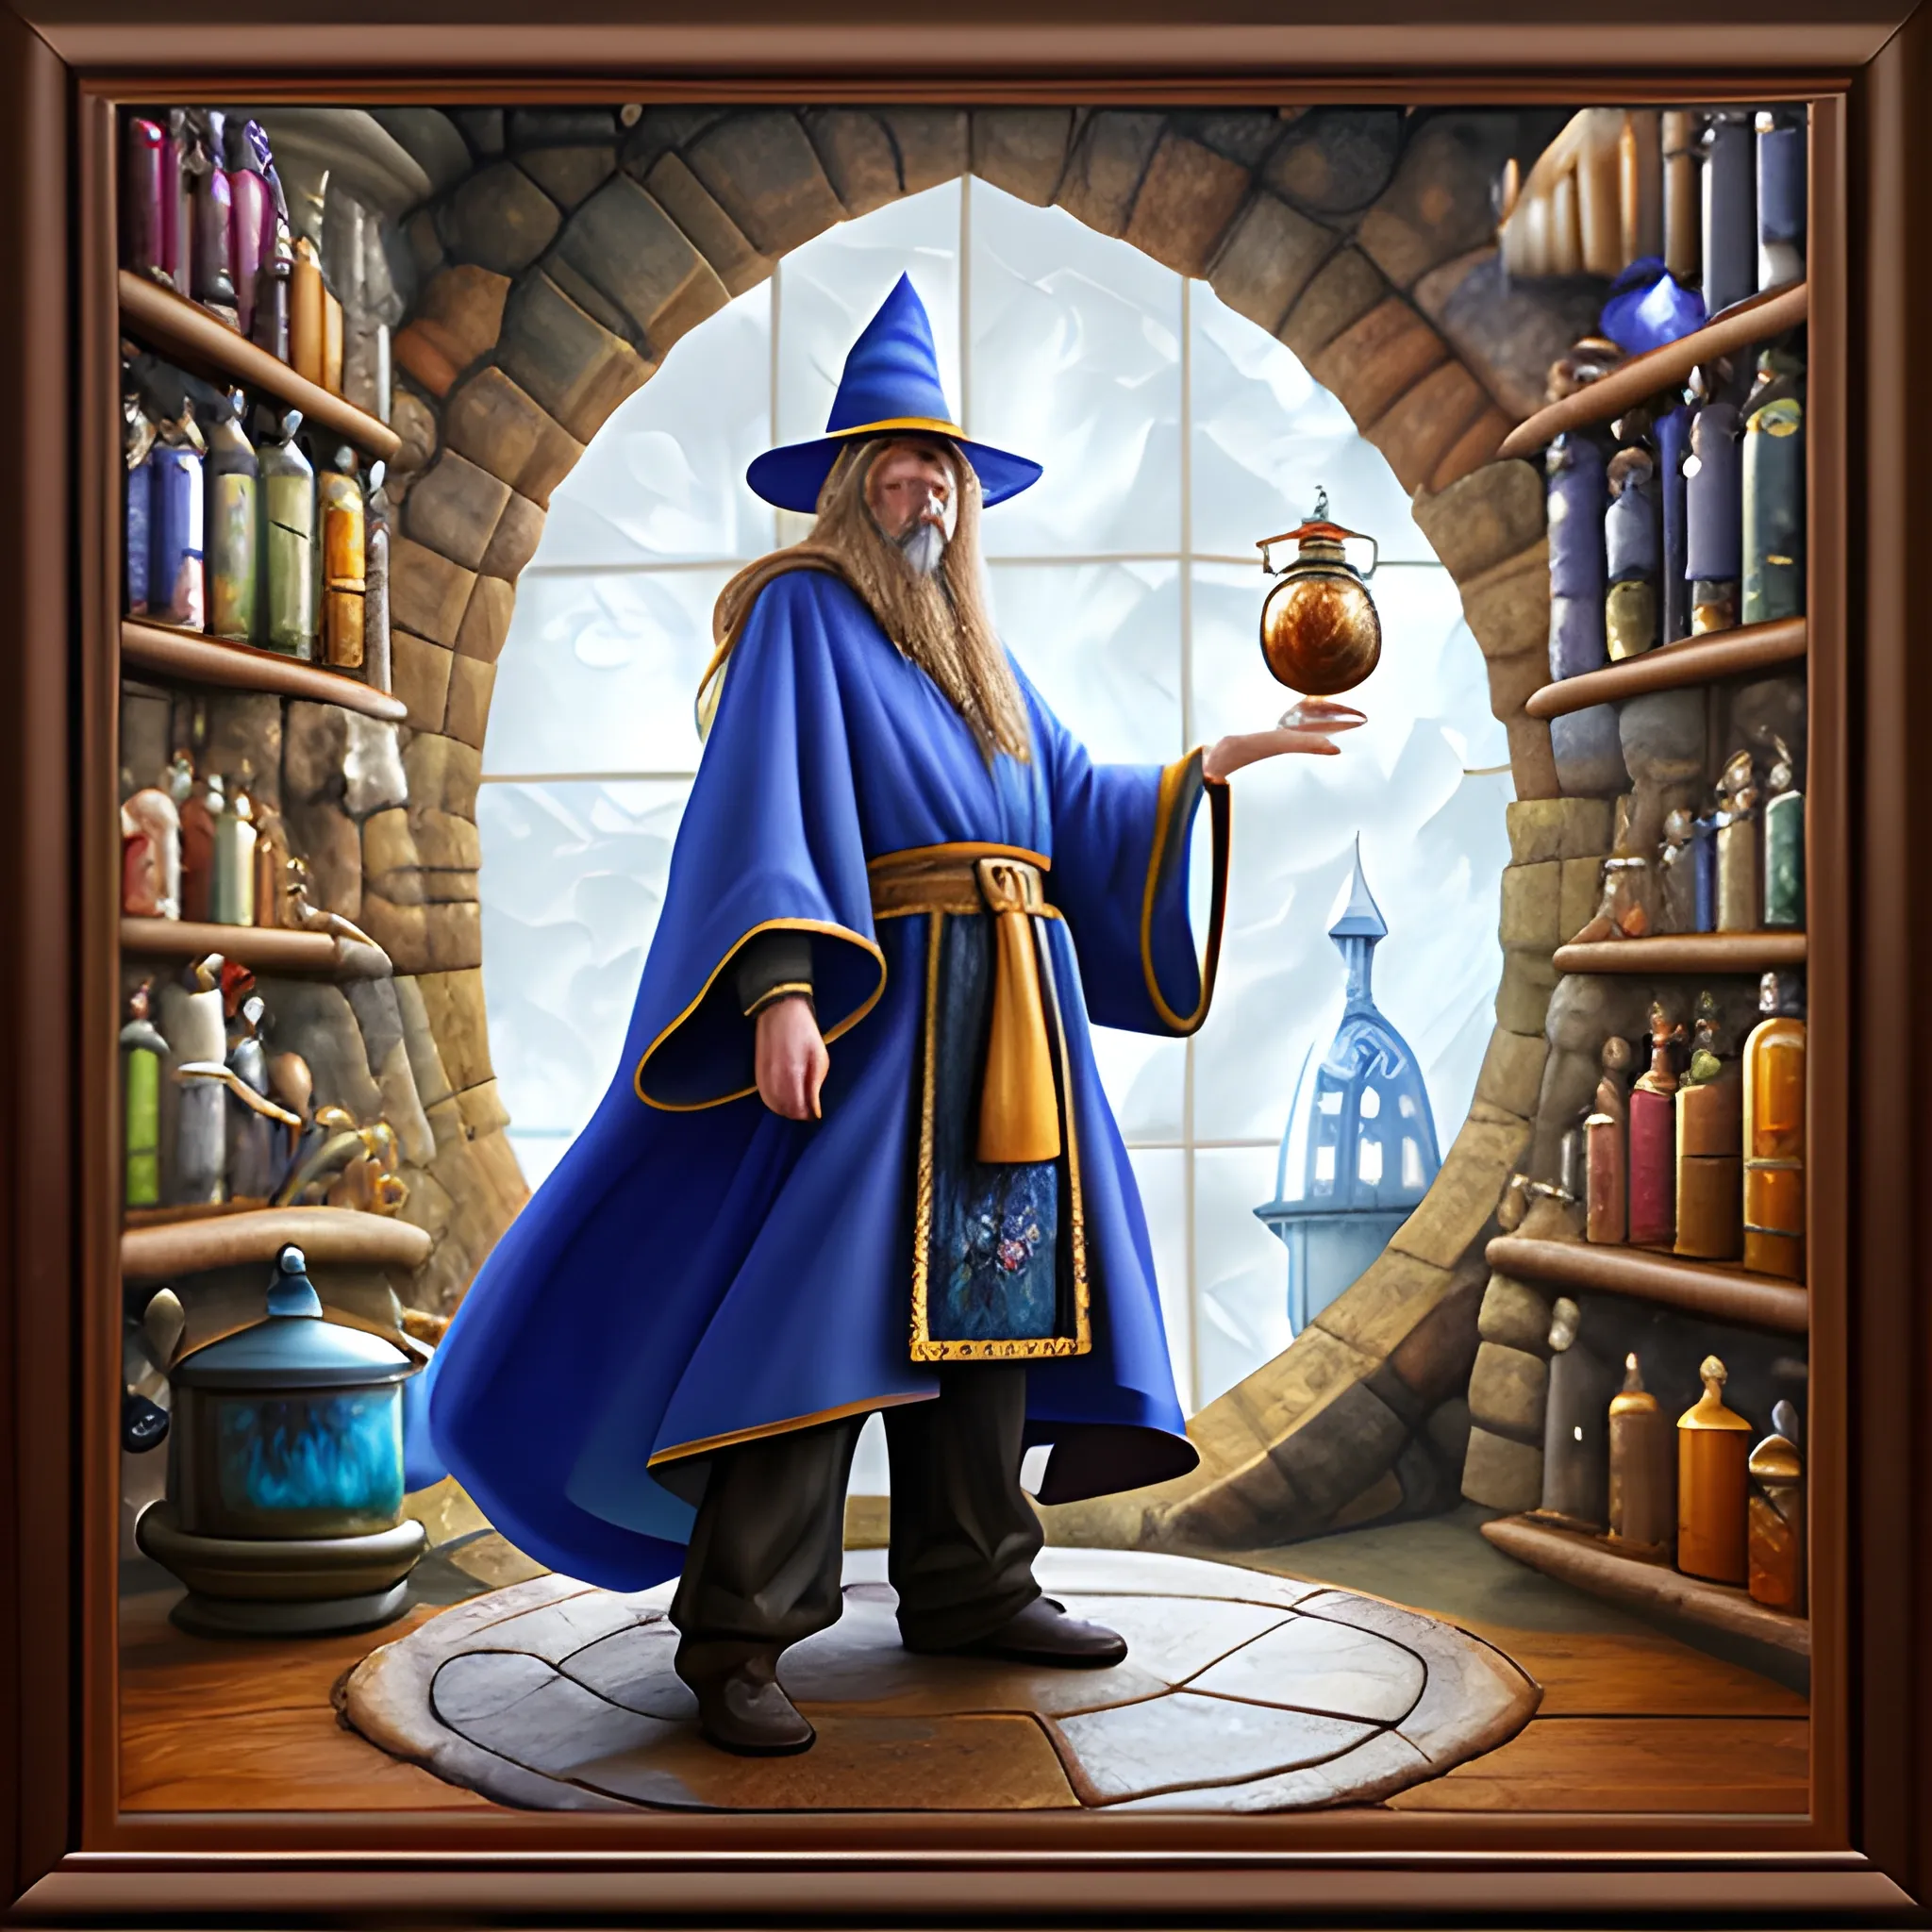 , 3D, Oil Painting, wizard with big wizard hat, large robes, in wizard tower looking out, conducting potions